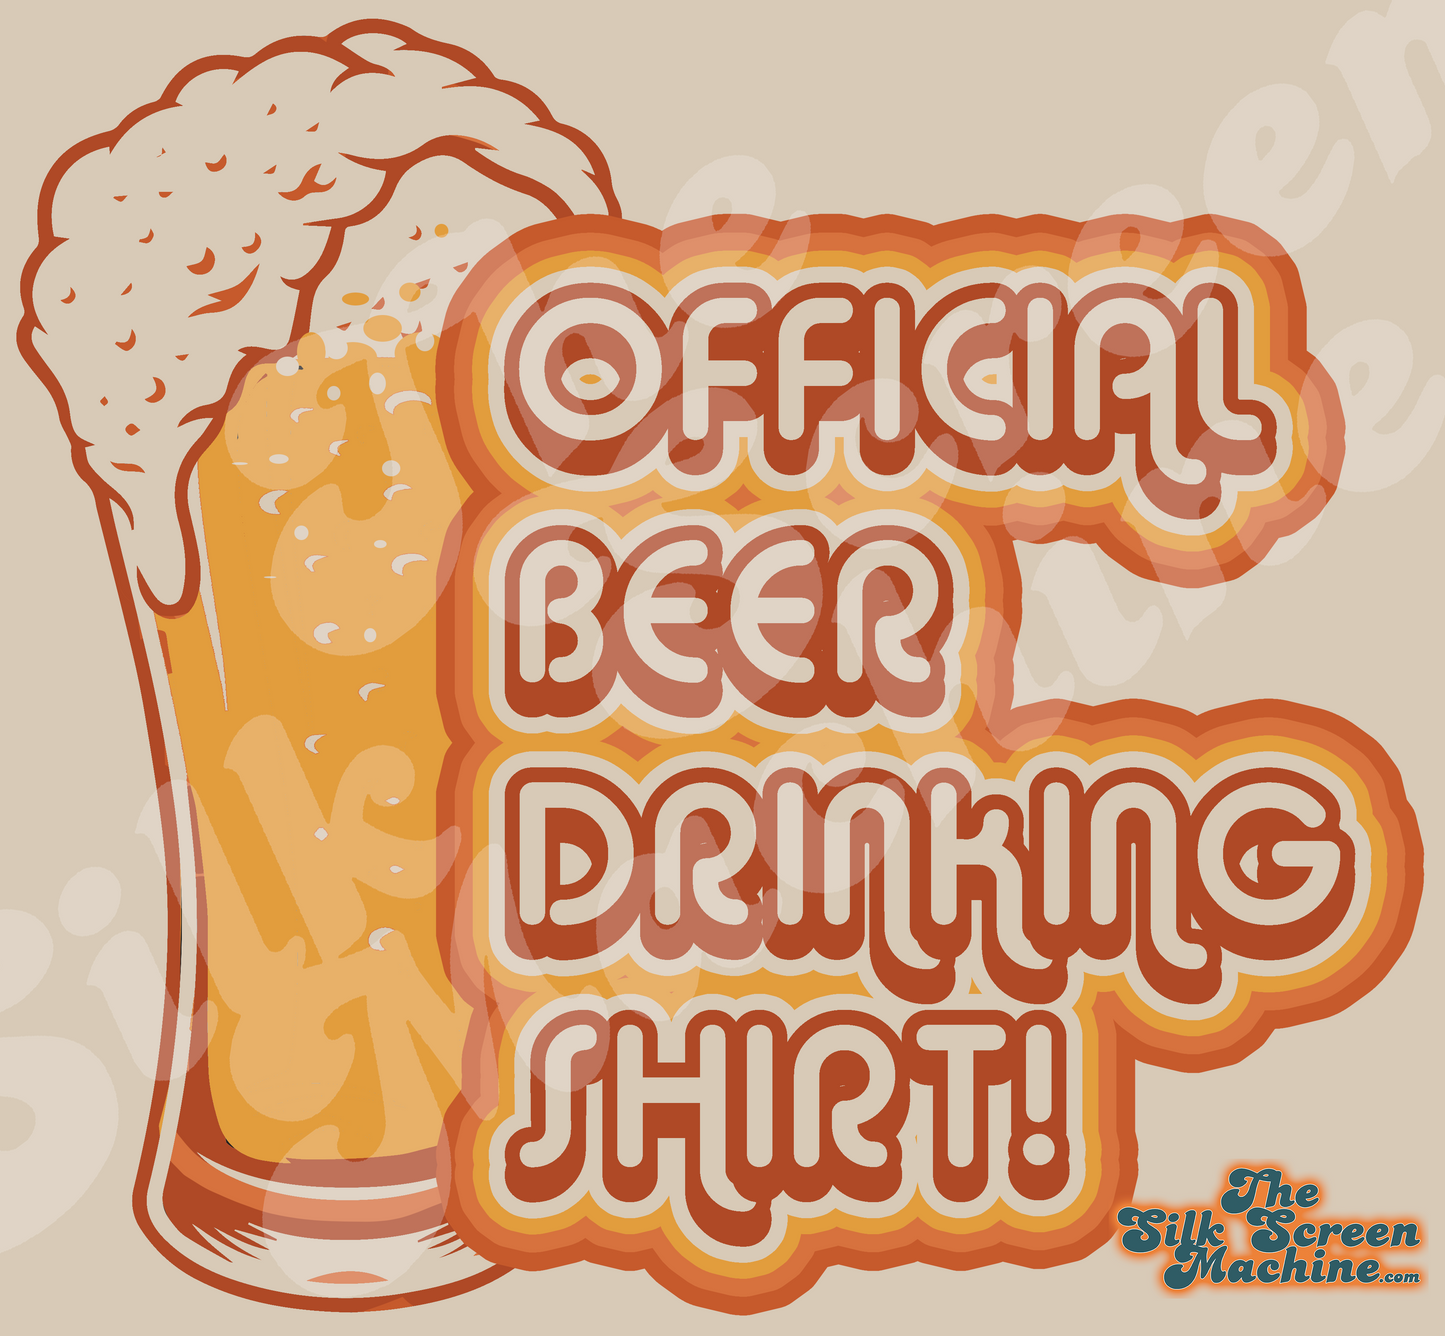 Official Beer 🍺 Drinking Shirt